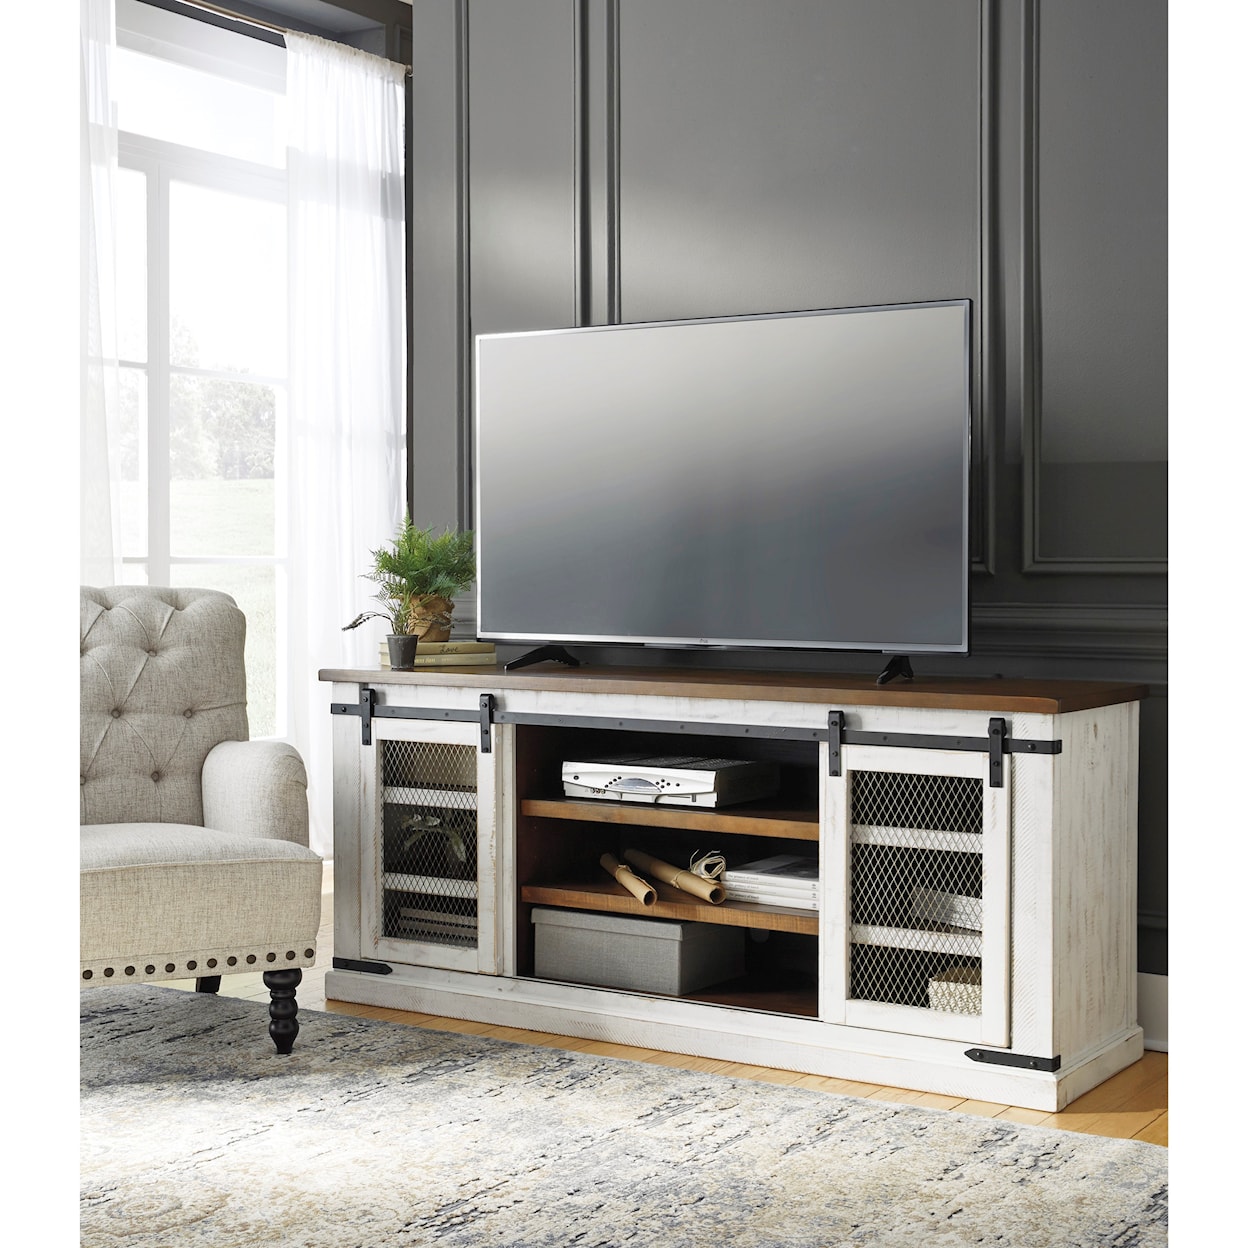 Signature Design by Ashley Furniture Danell Ridge Extra Large TV Stand